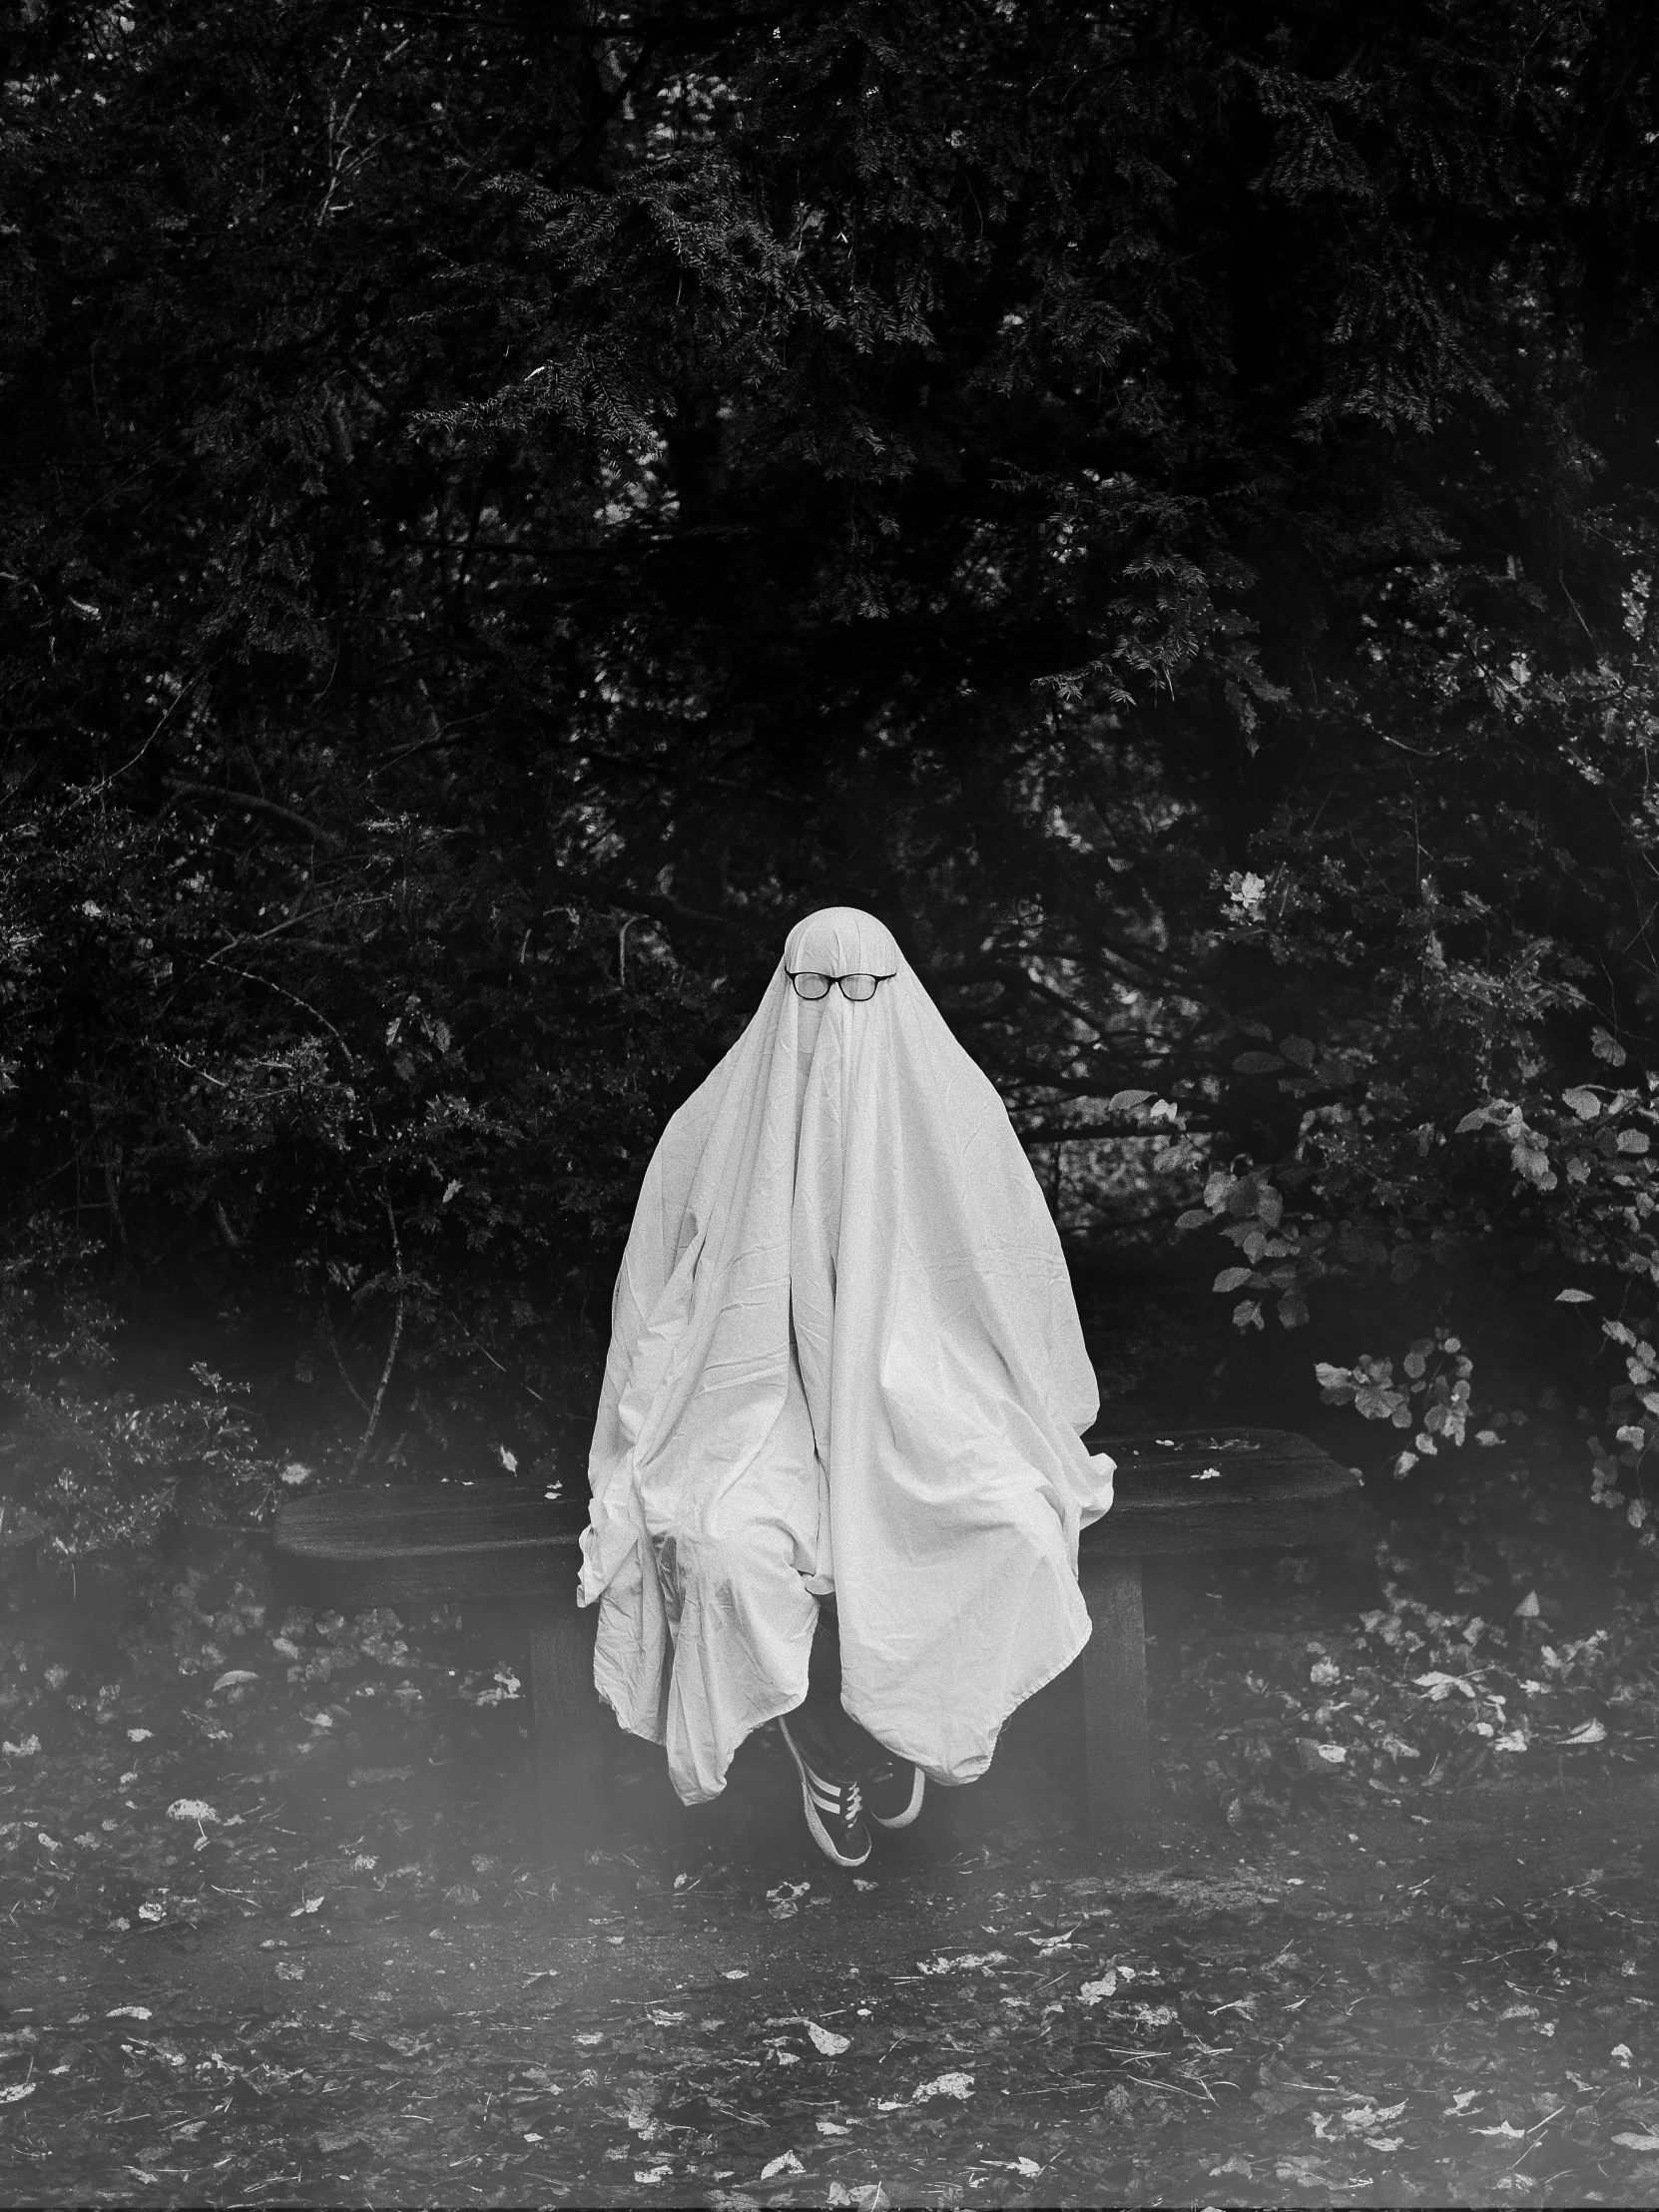 a black and white photo of a person in a ghost costume, an album cover, by Lucia Peka, unsplash, white clothes, 2 0 1 7, kacper niepokolczycki, 2019